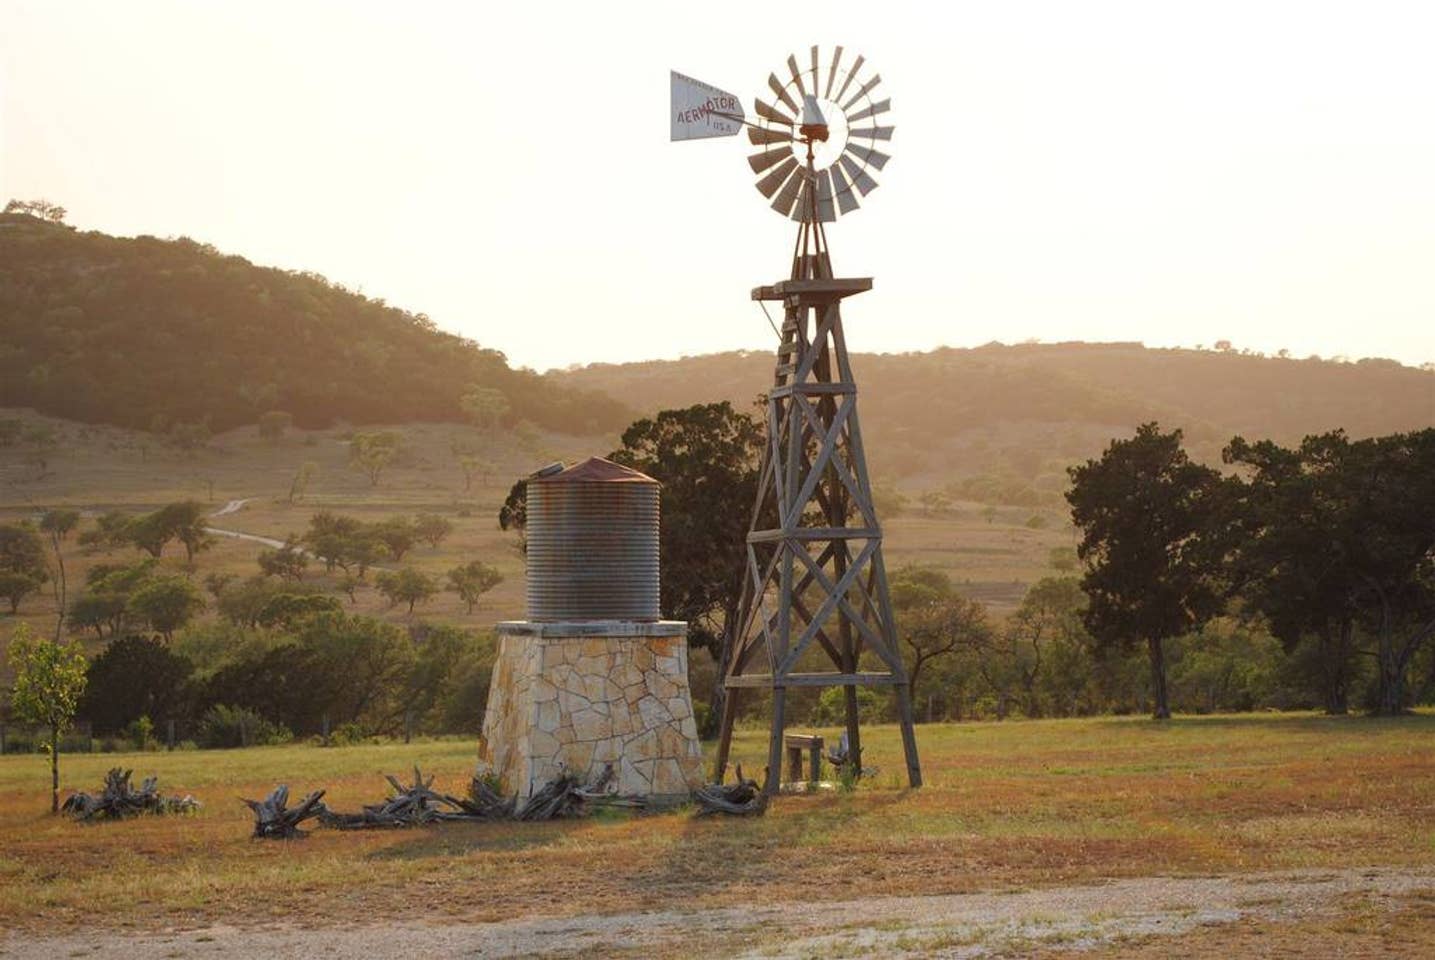                                                 The Last Outpost offers not only views of the gorgeous Hill Country, but gives visitors a sense of the region's history, as well.